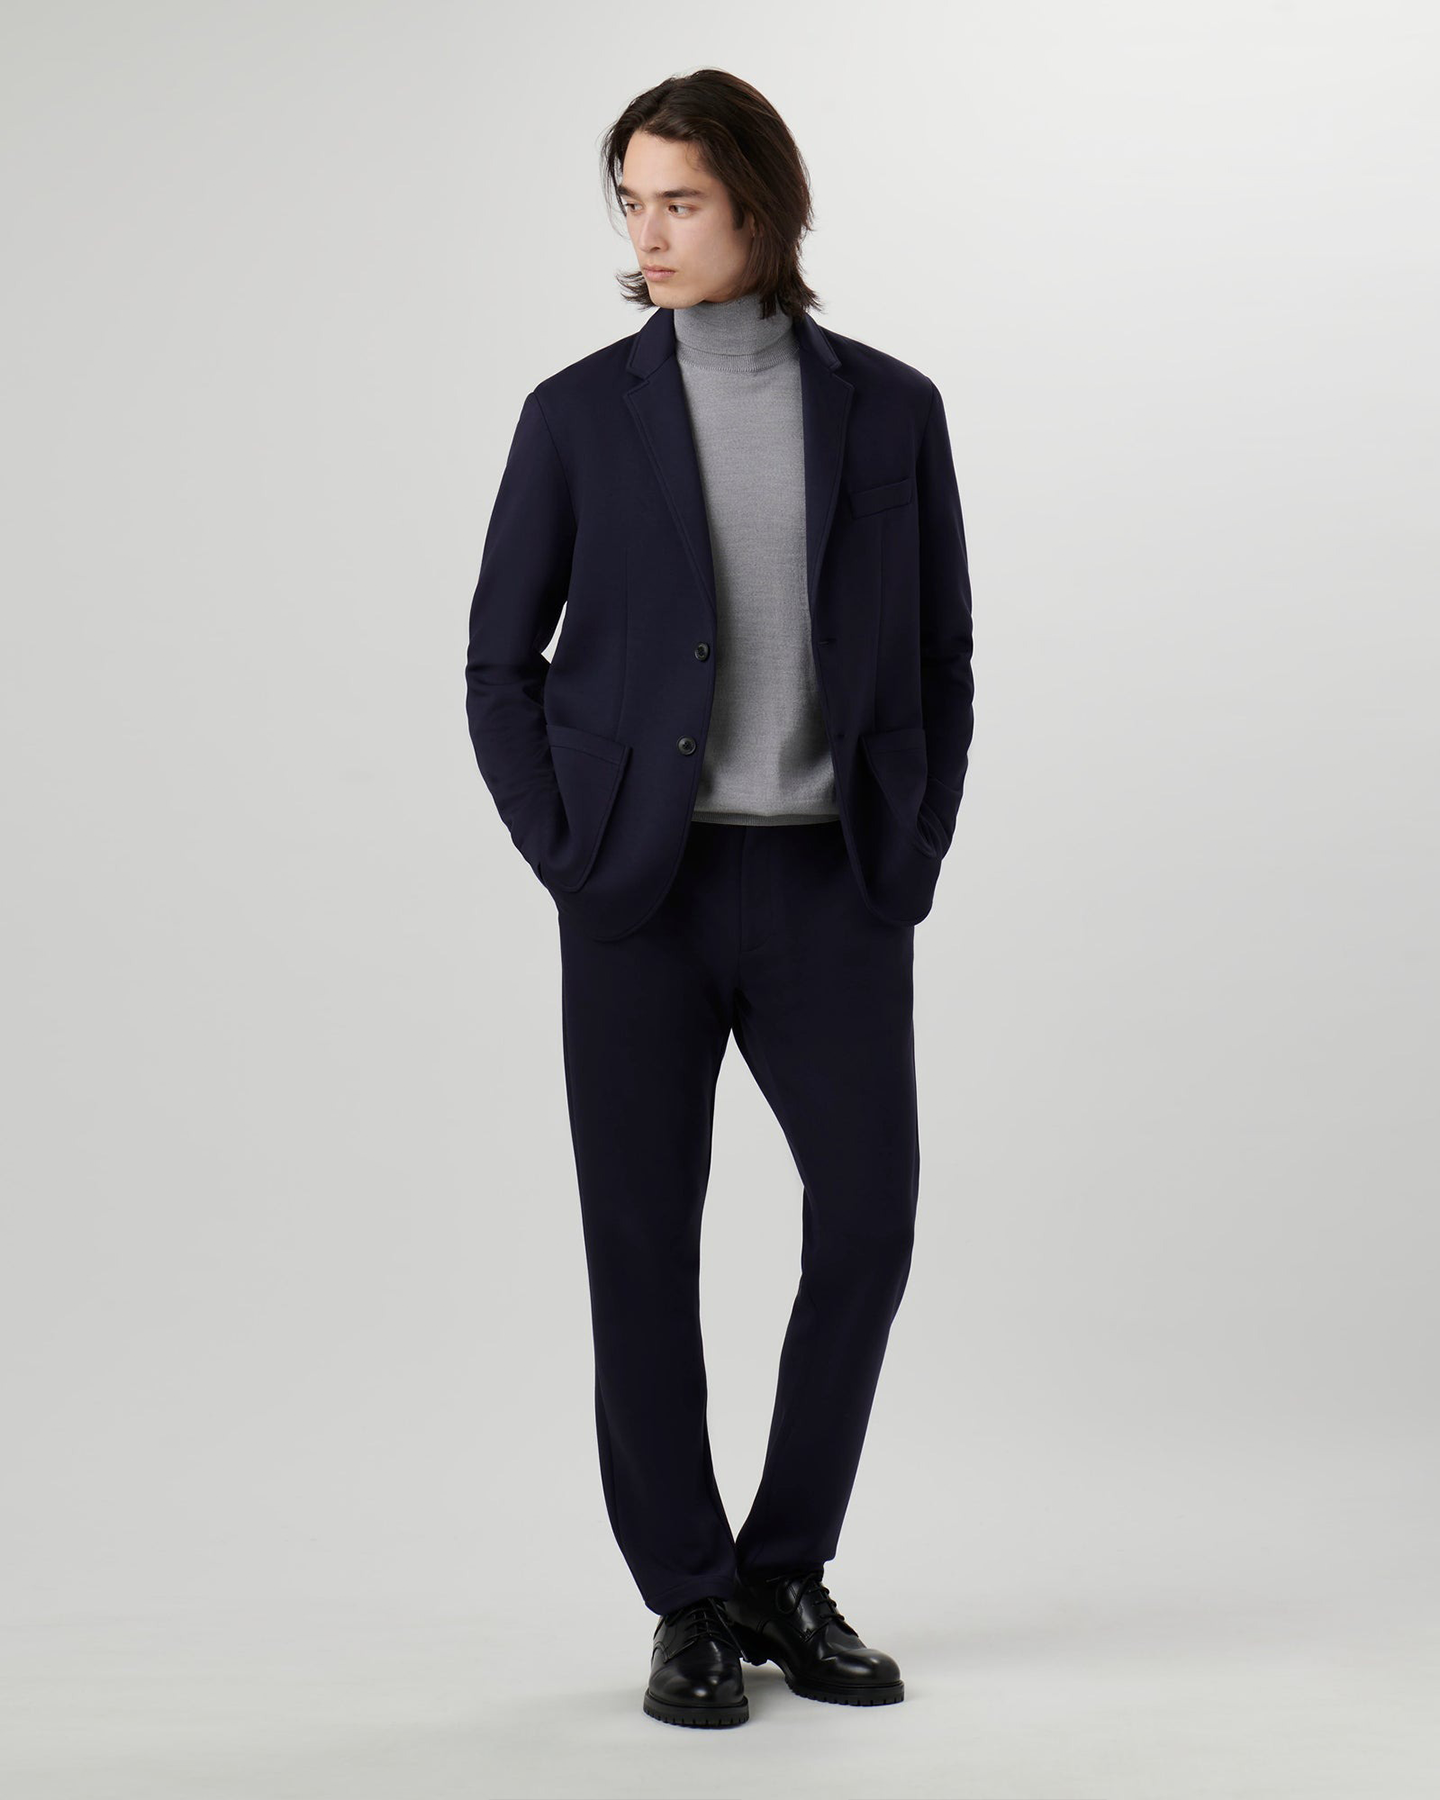 TWO BUTTON SOFT TOUCH BLAZER - NAVY